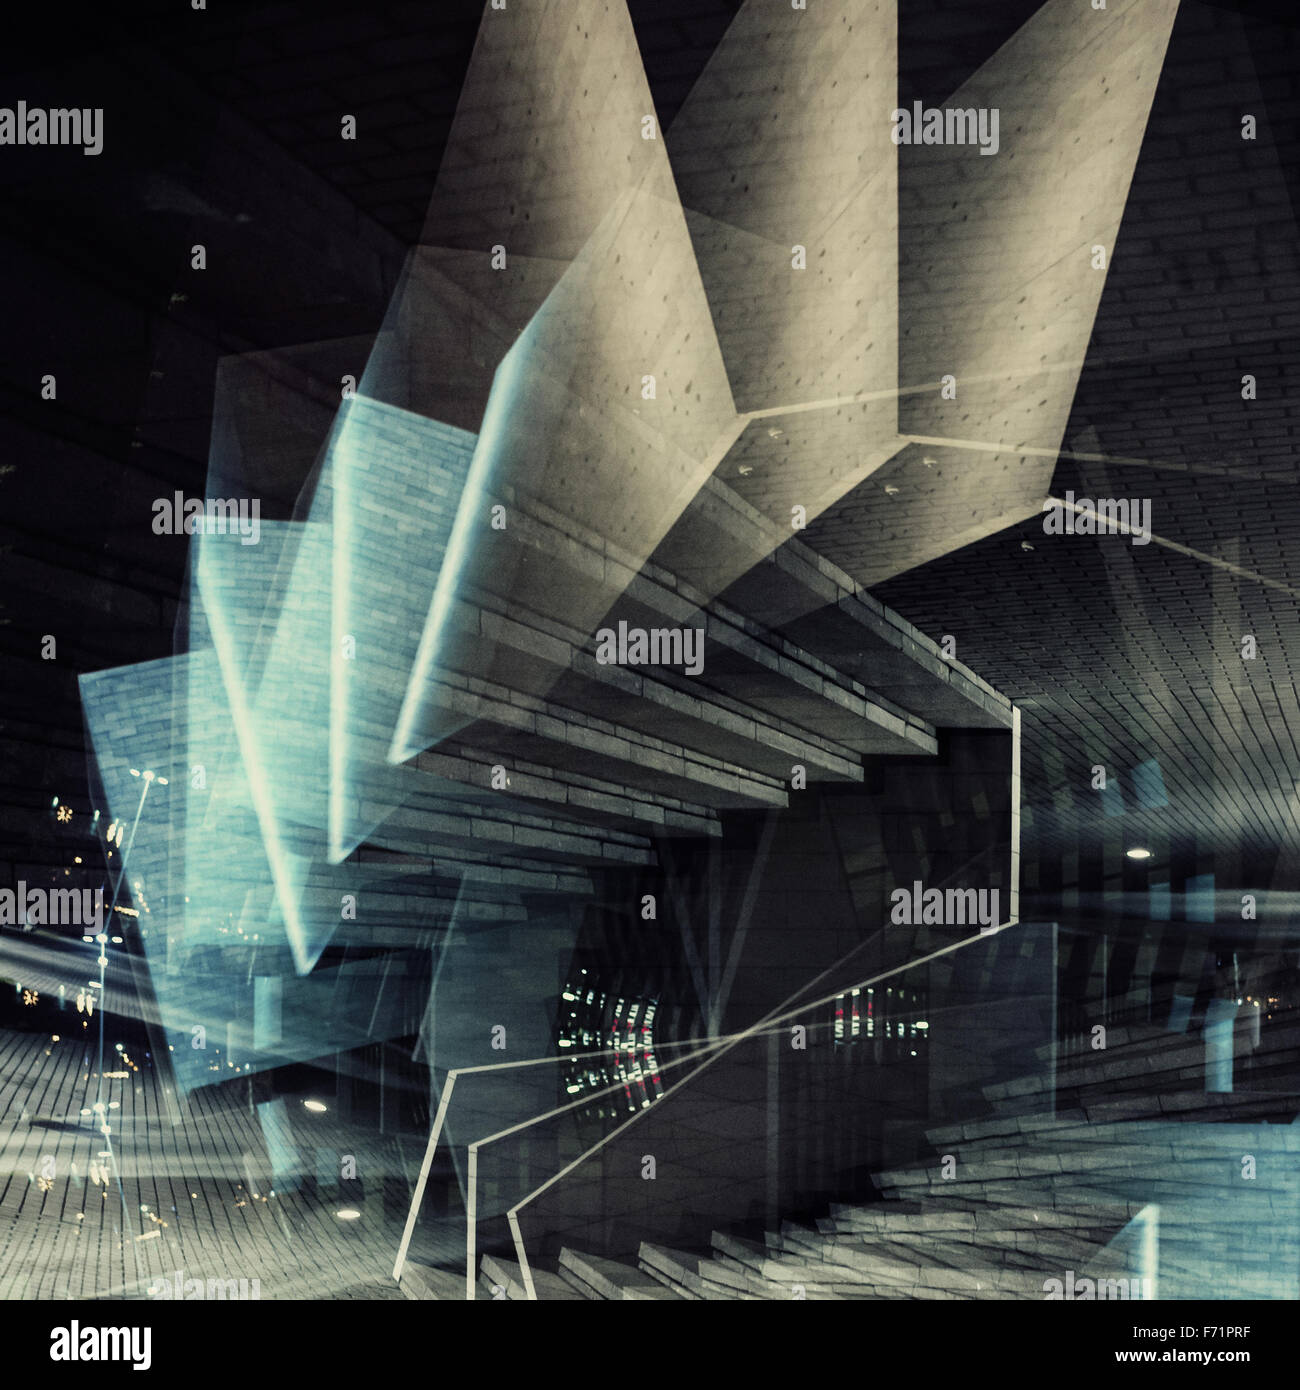 Abstract multiple exposure background. Architectural forms. Stock Photo